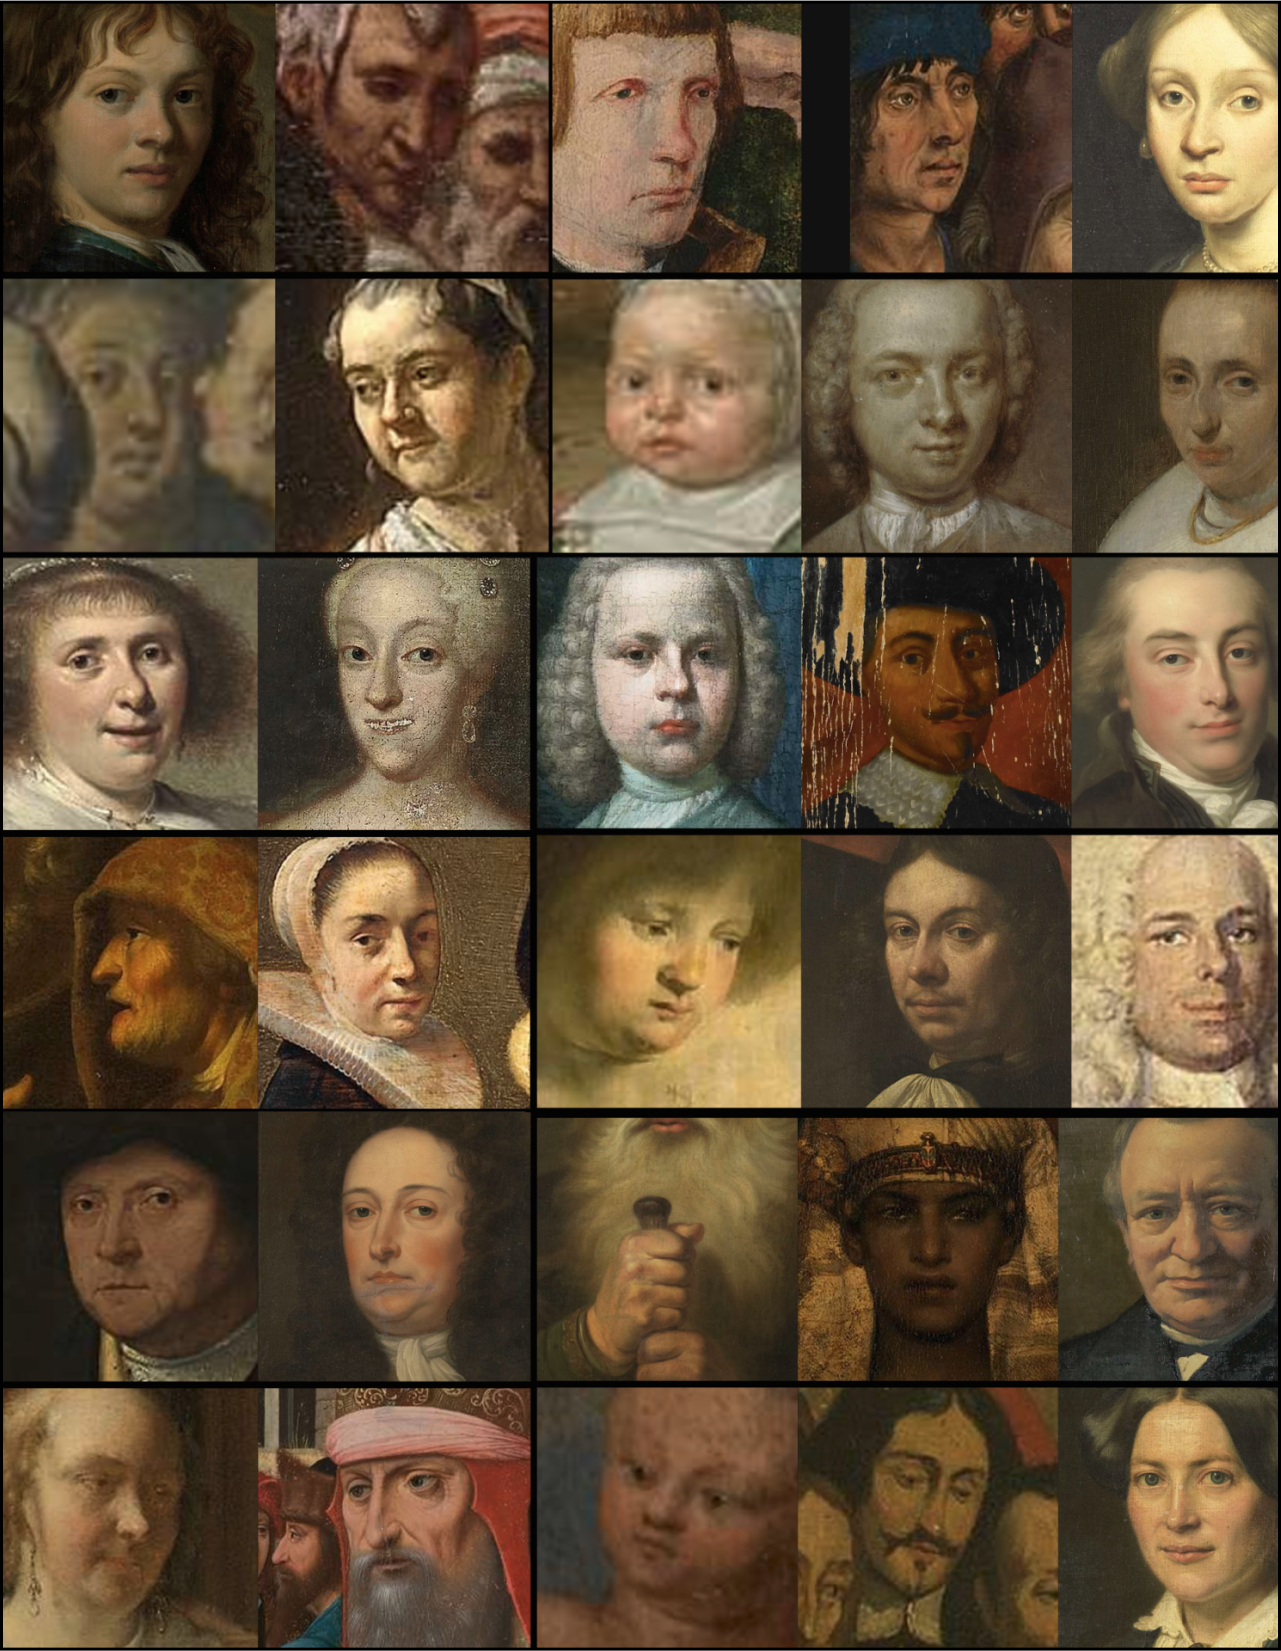 Mosaic of painted, expressive faces from the Rijksmuseum (1 of 2 images)